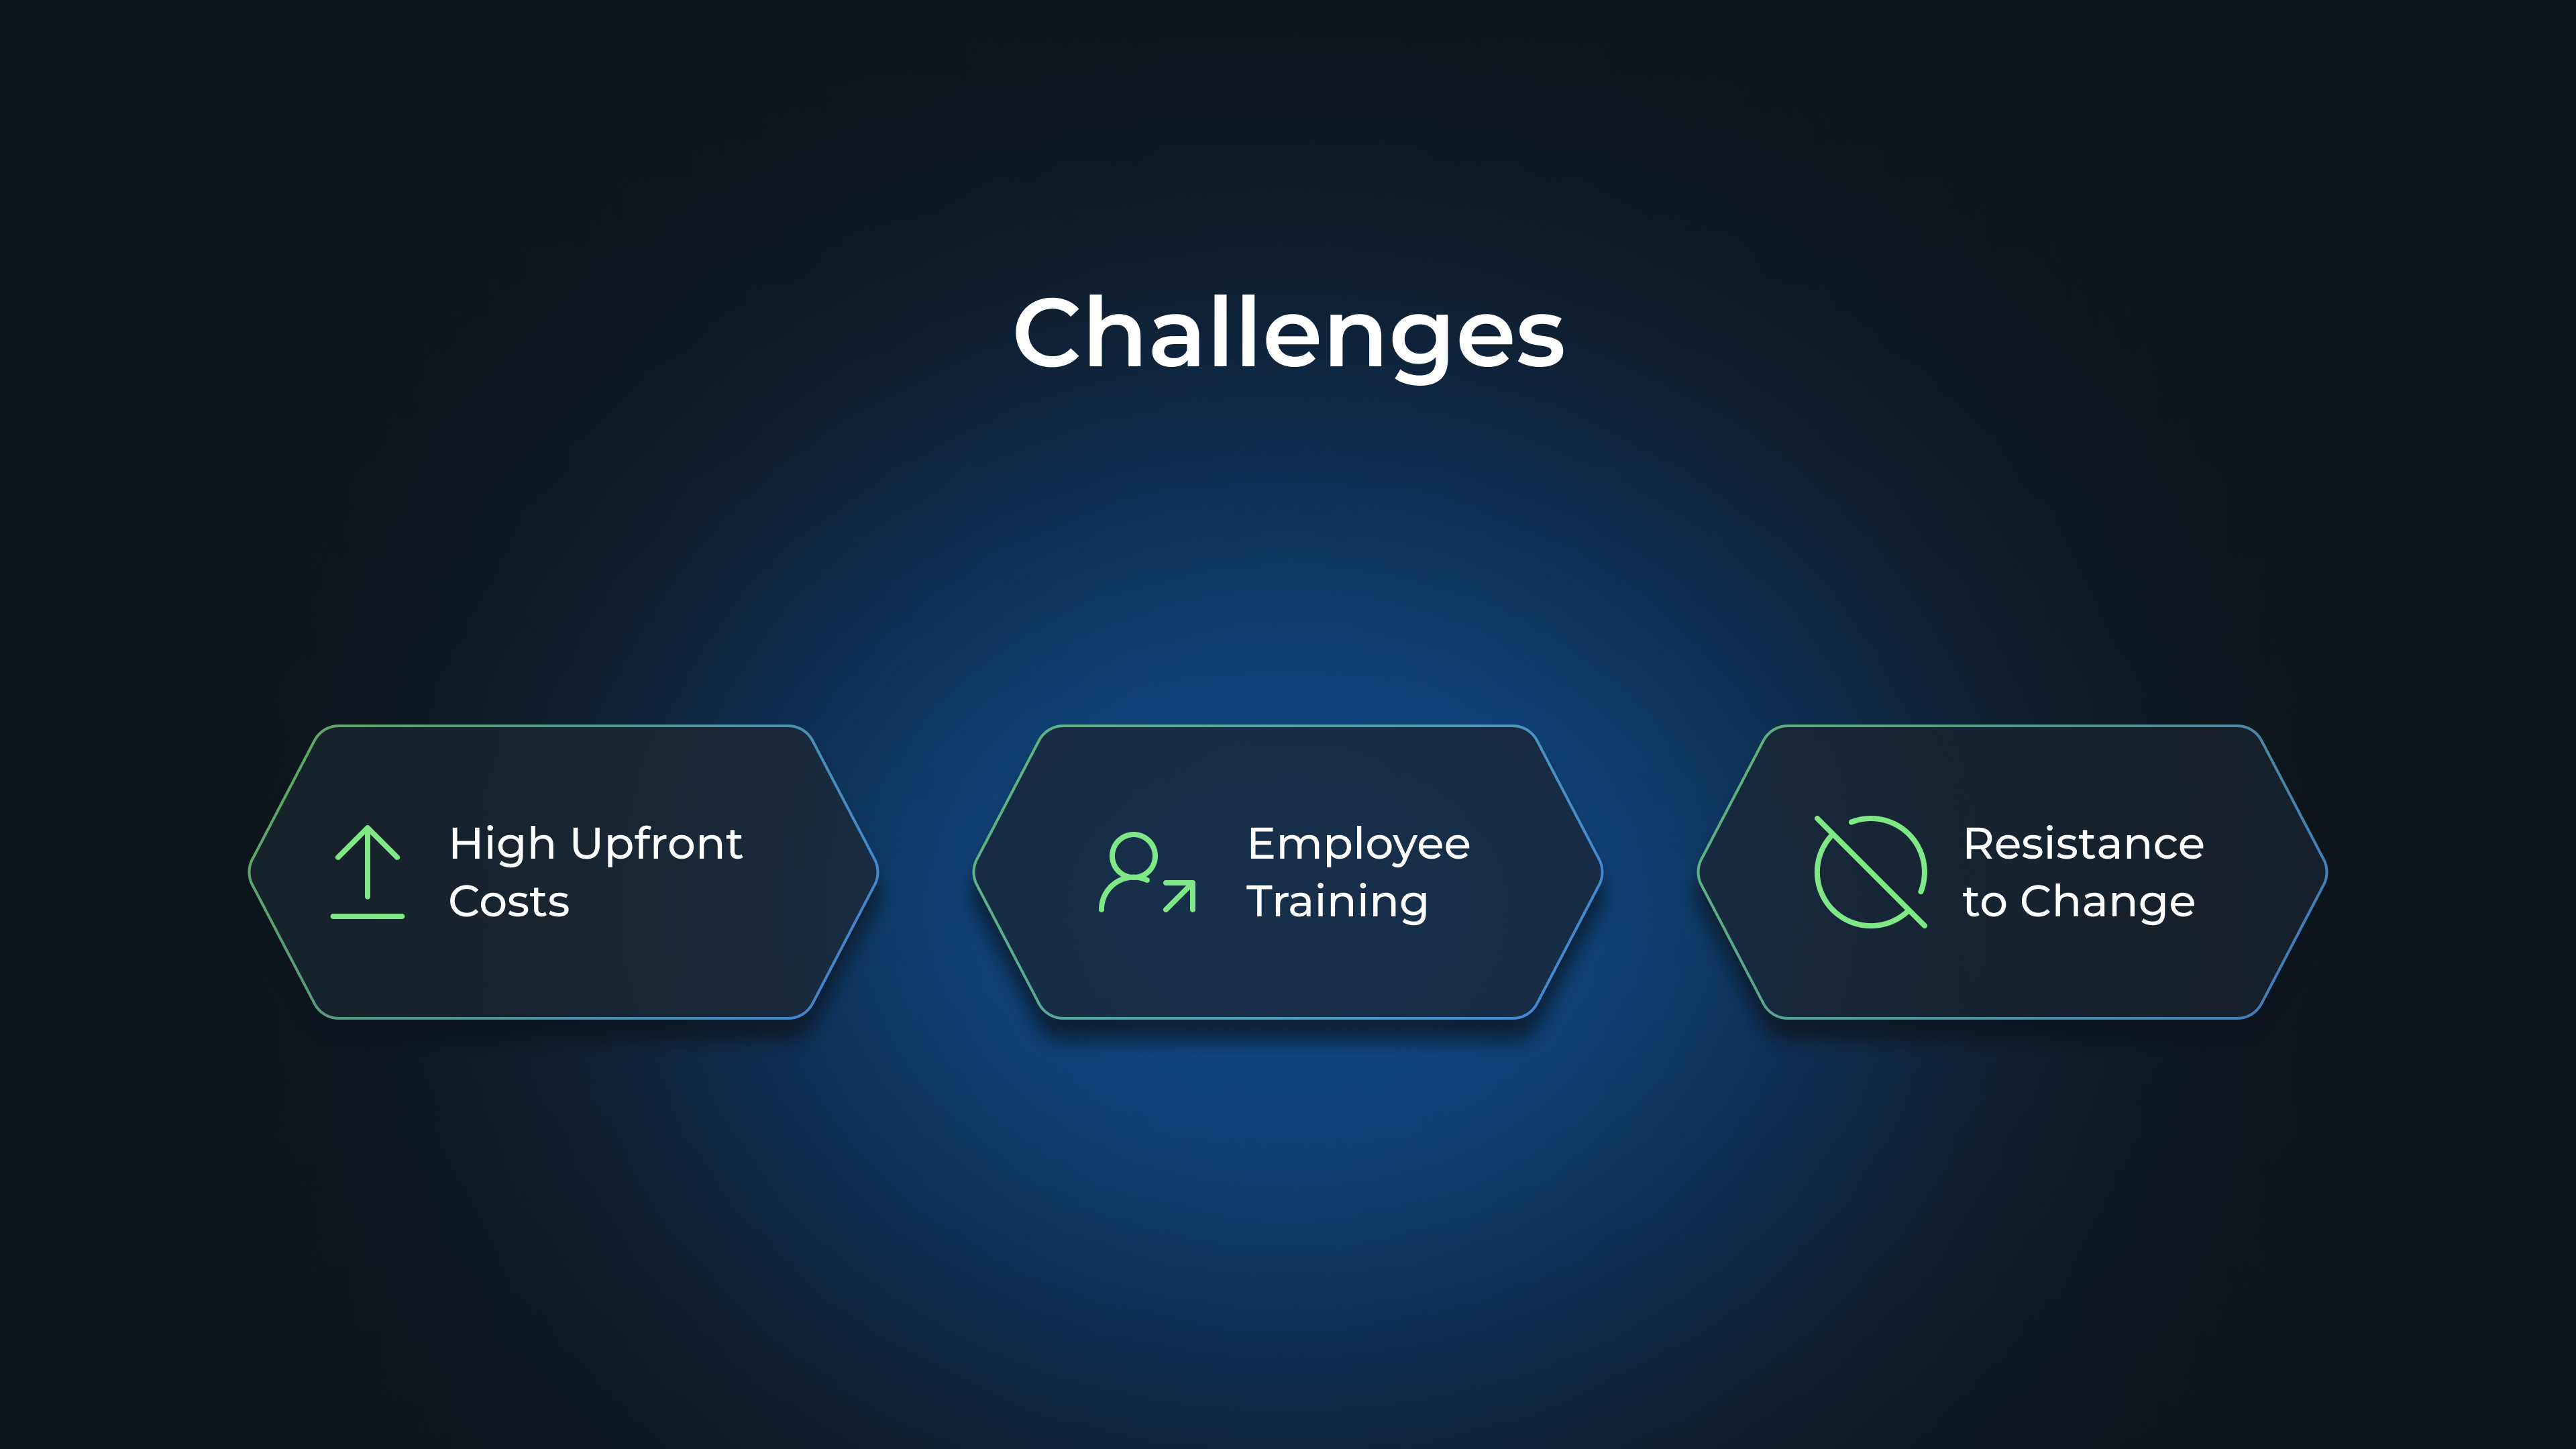 Challenges: High Upfront Costs, Employee Training, Resistance to Change
